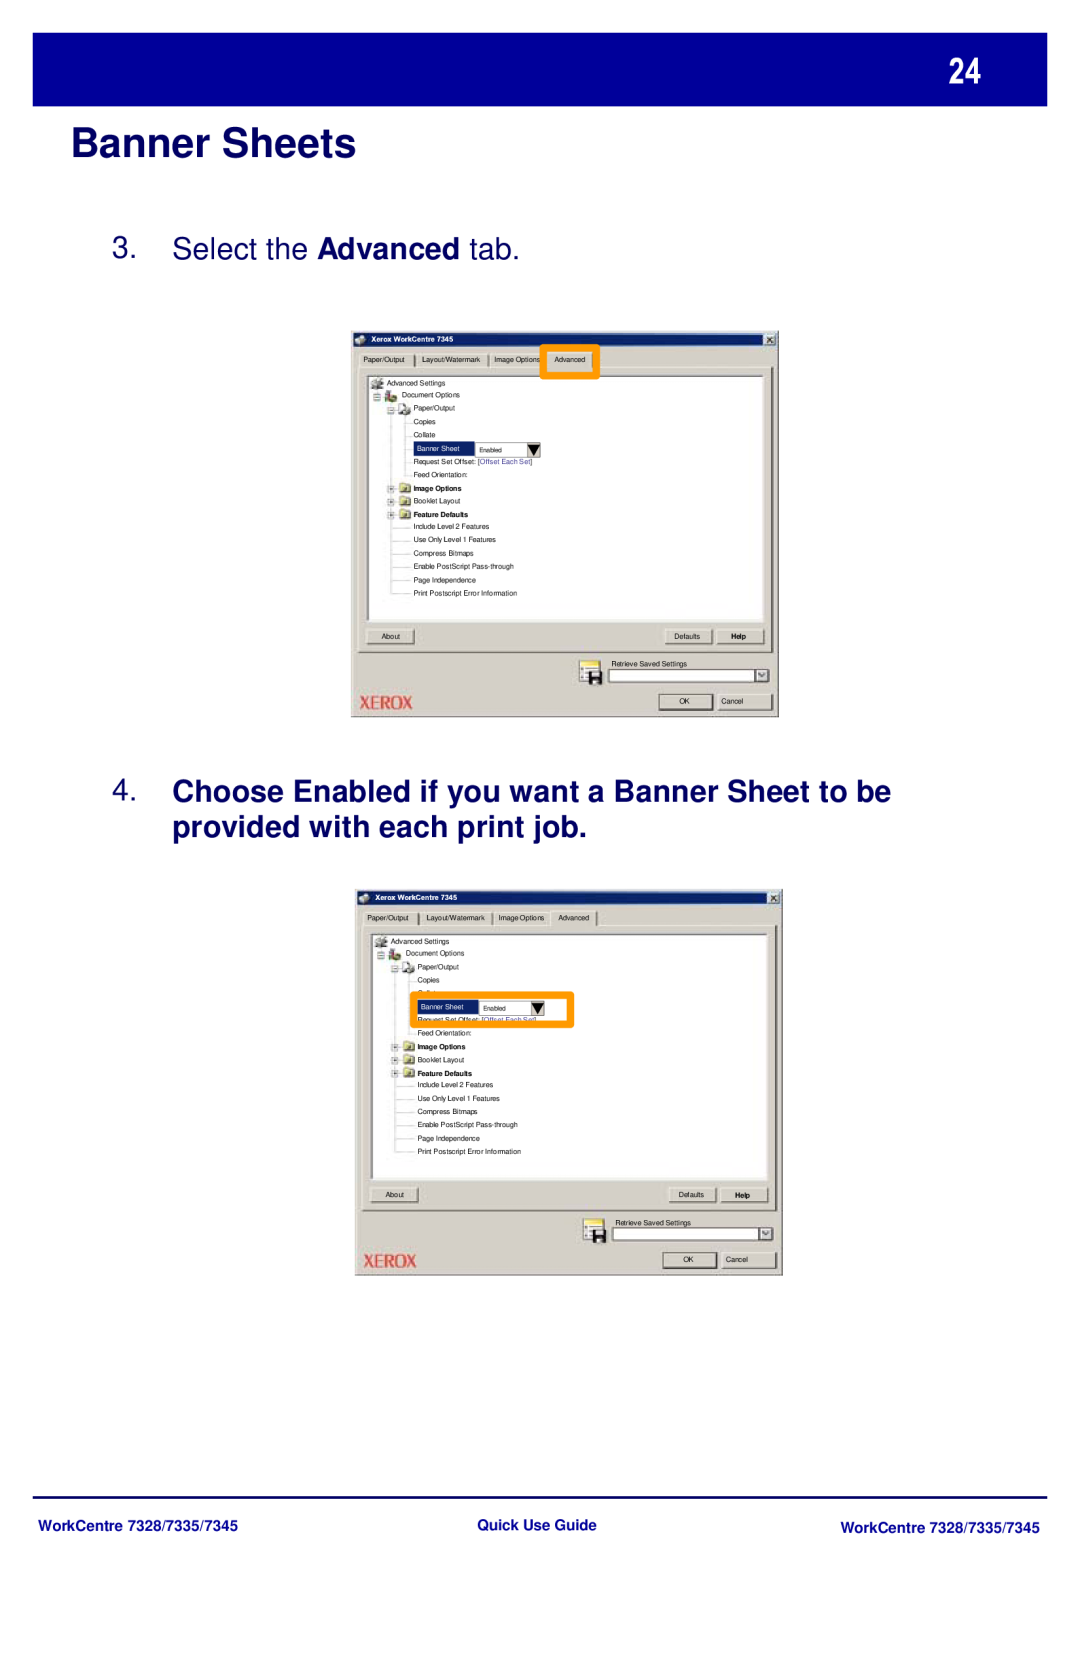 Xerox Banner Sheets, WorkCentre 7328/7335/7345, Quick Use Guide, Offset Each Set, Image Options, Feature Defaults, Help 